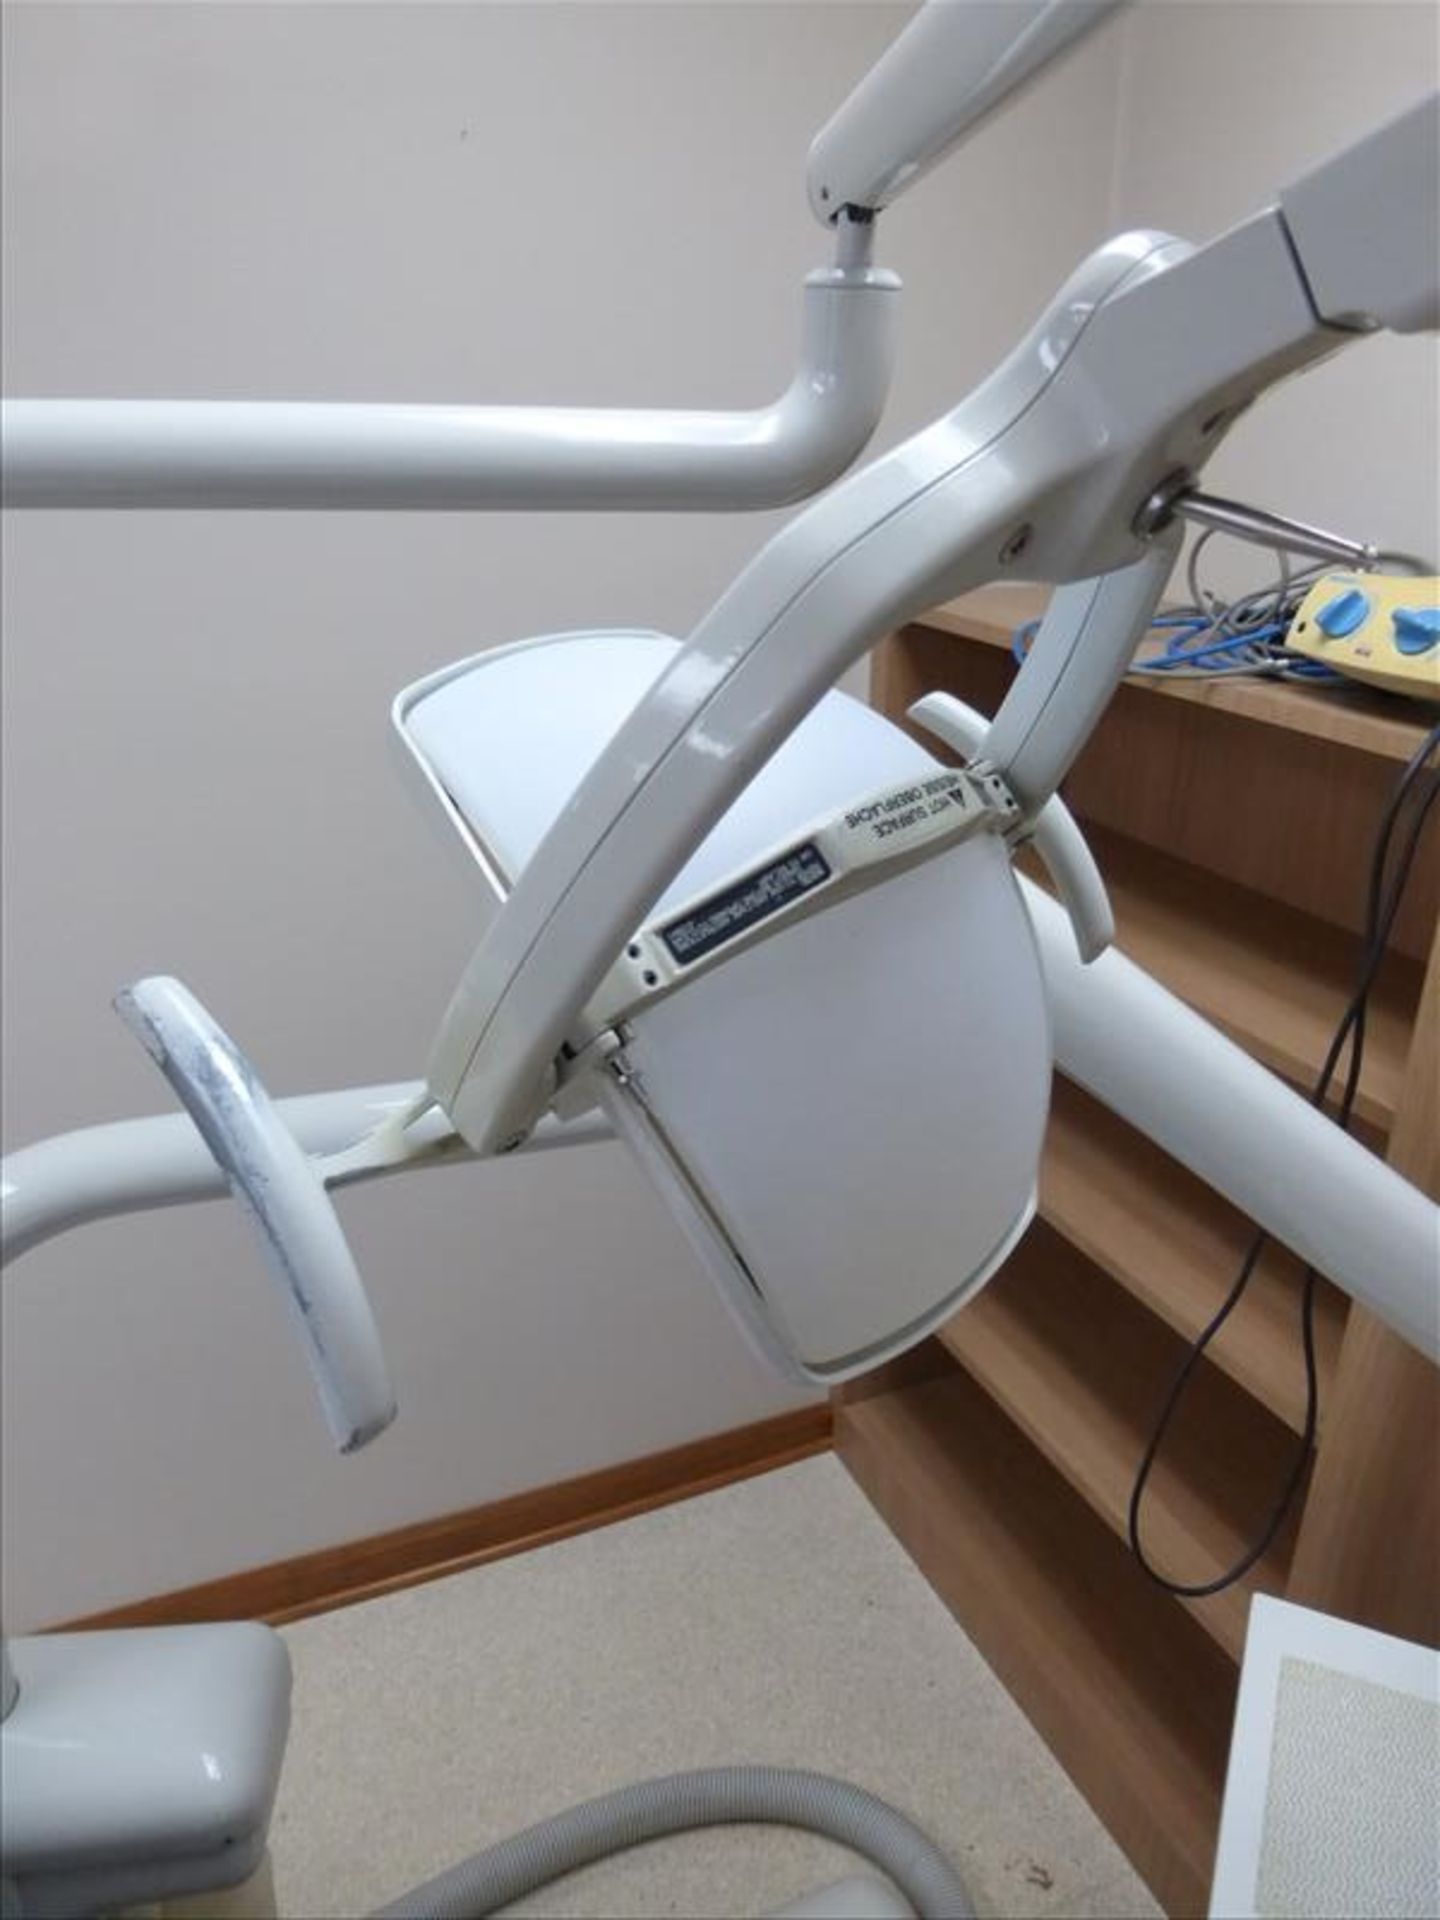 Pelton & Crane dental chair, model SP15 w/ delivery system, dental light and matching doctor and - Image 3 of 7